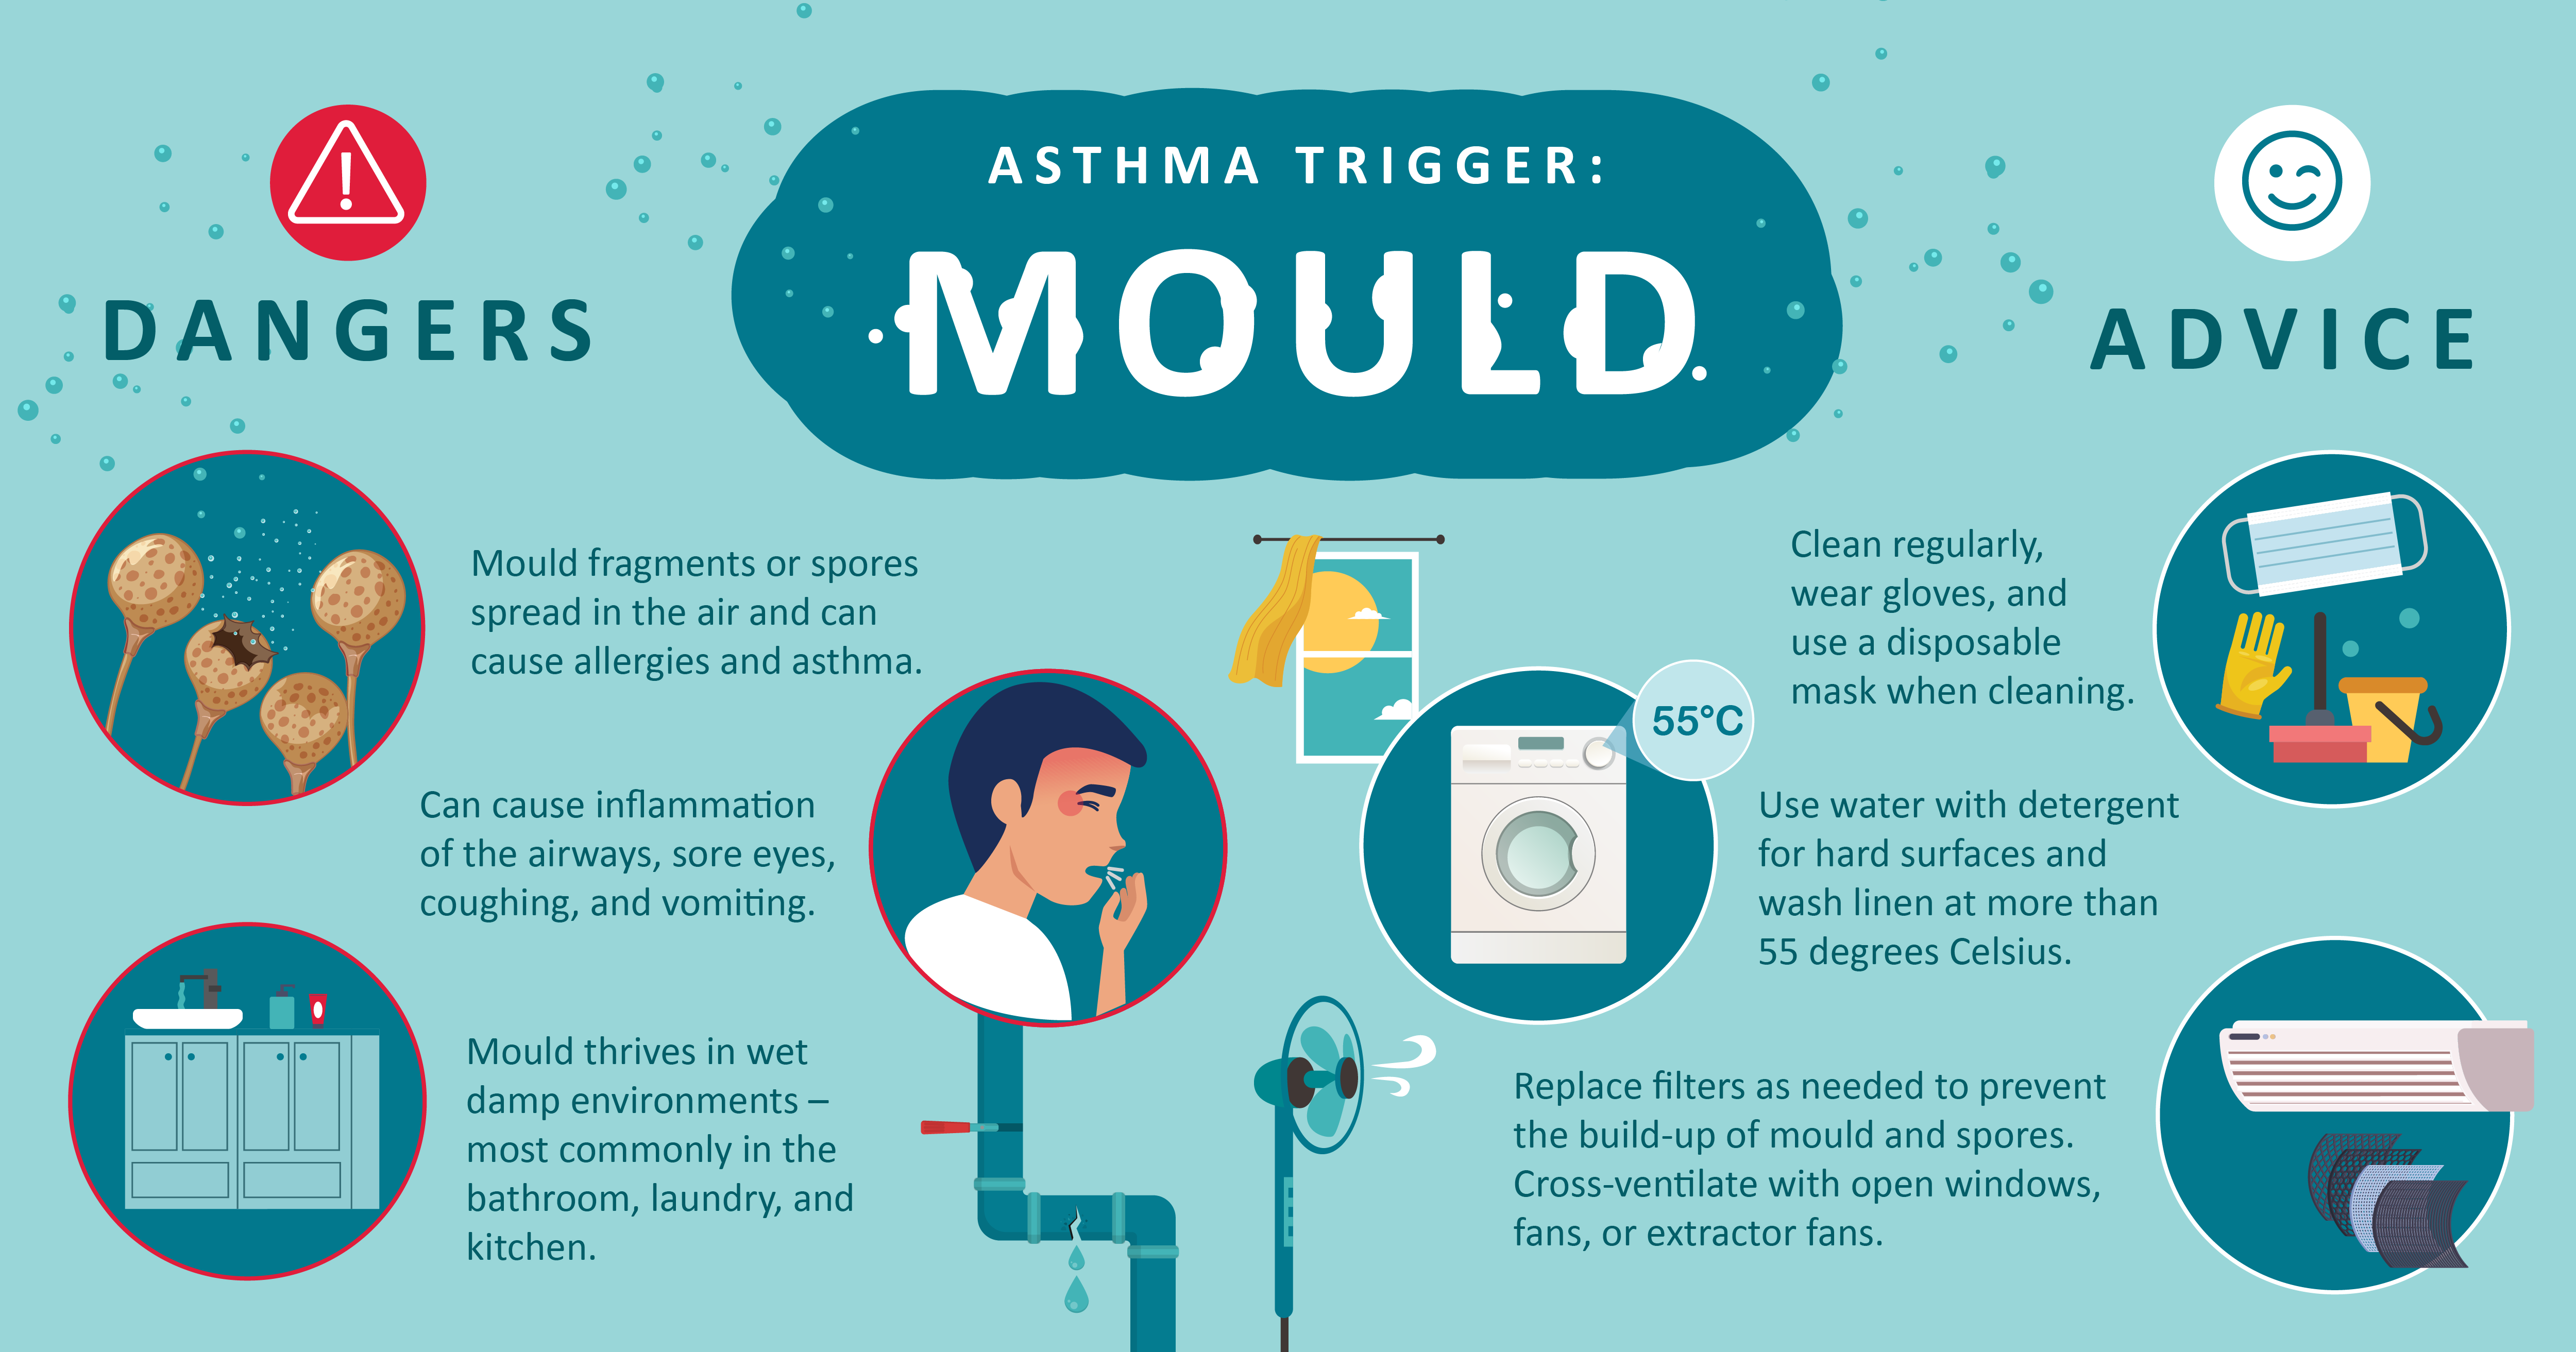 Asthma Trigger: Mould